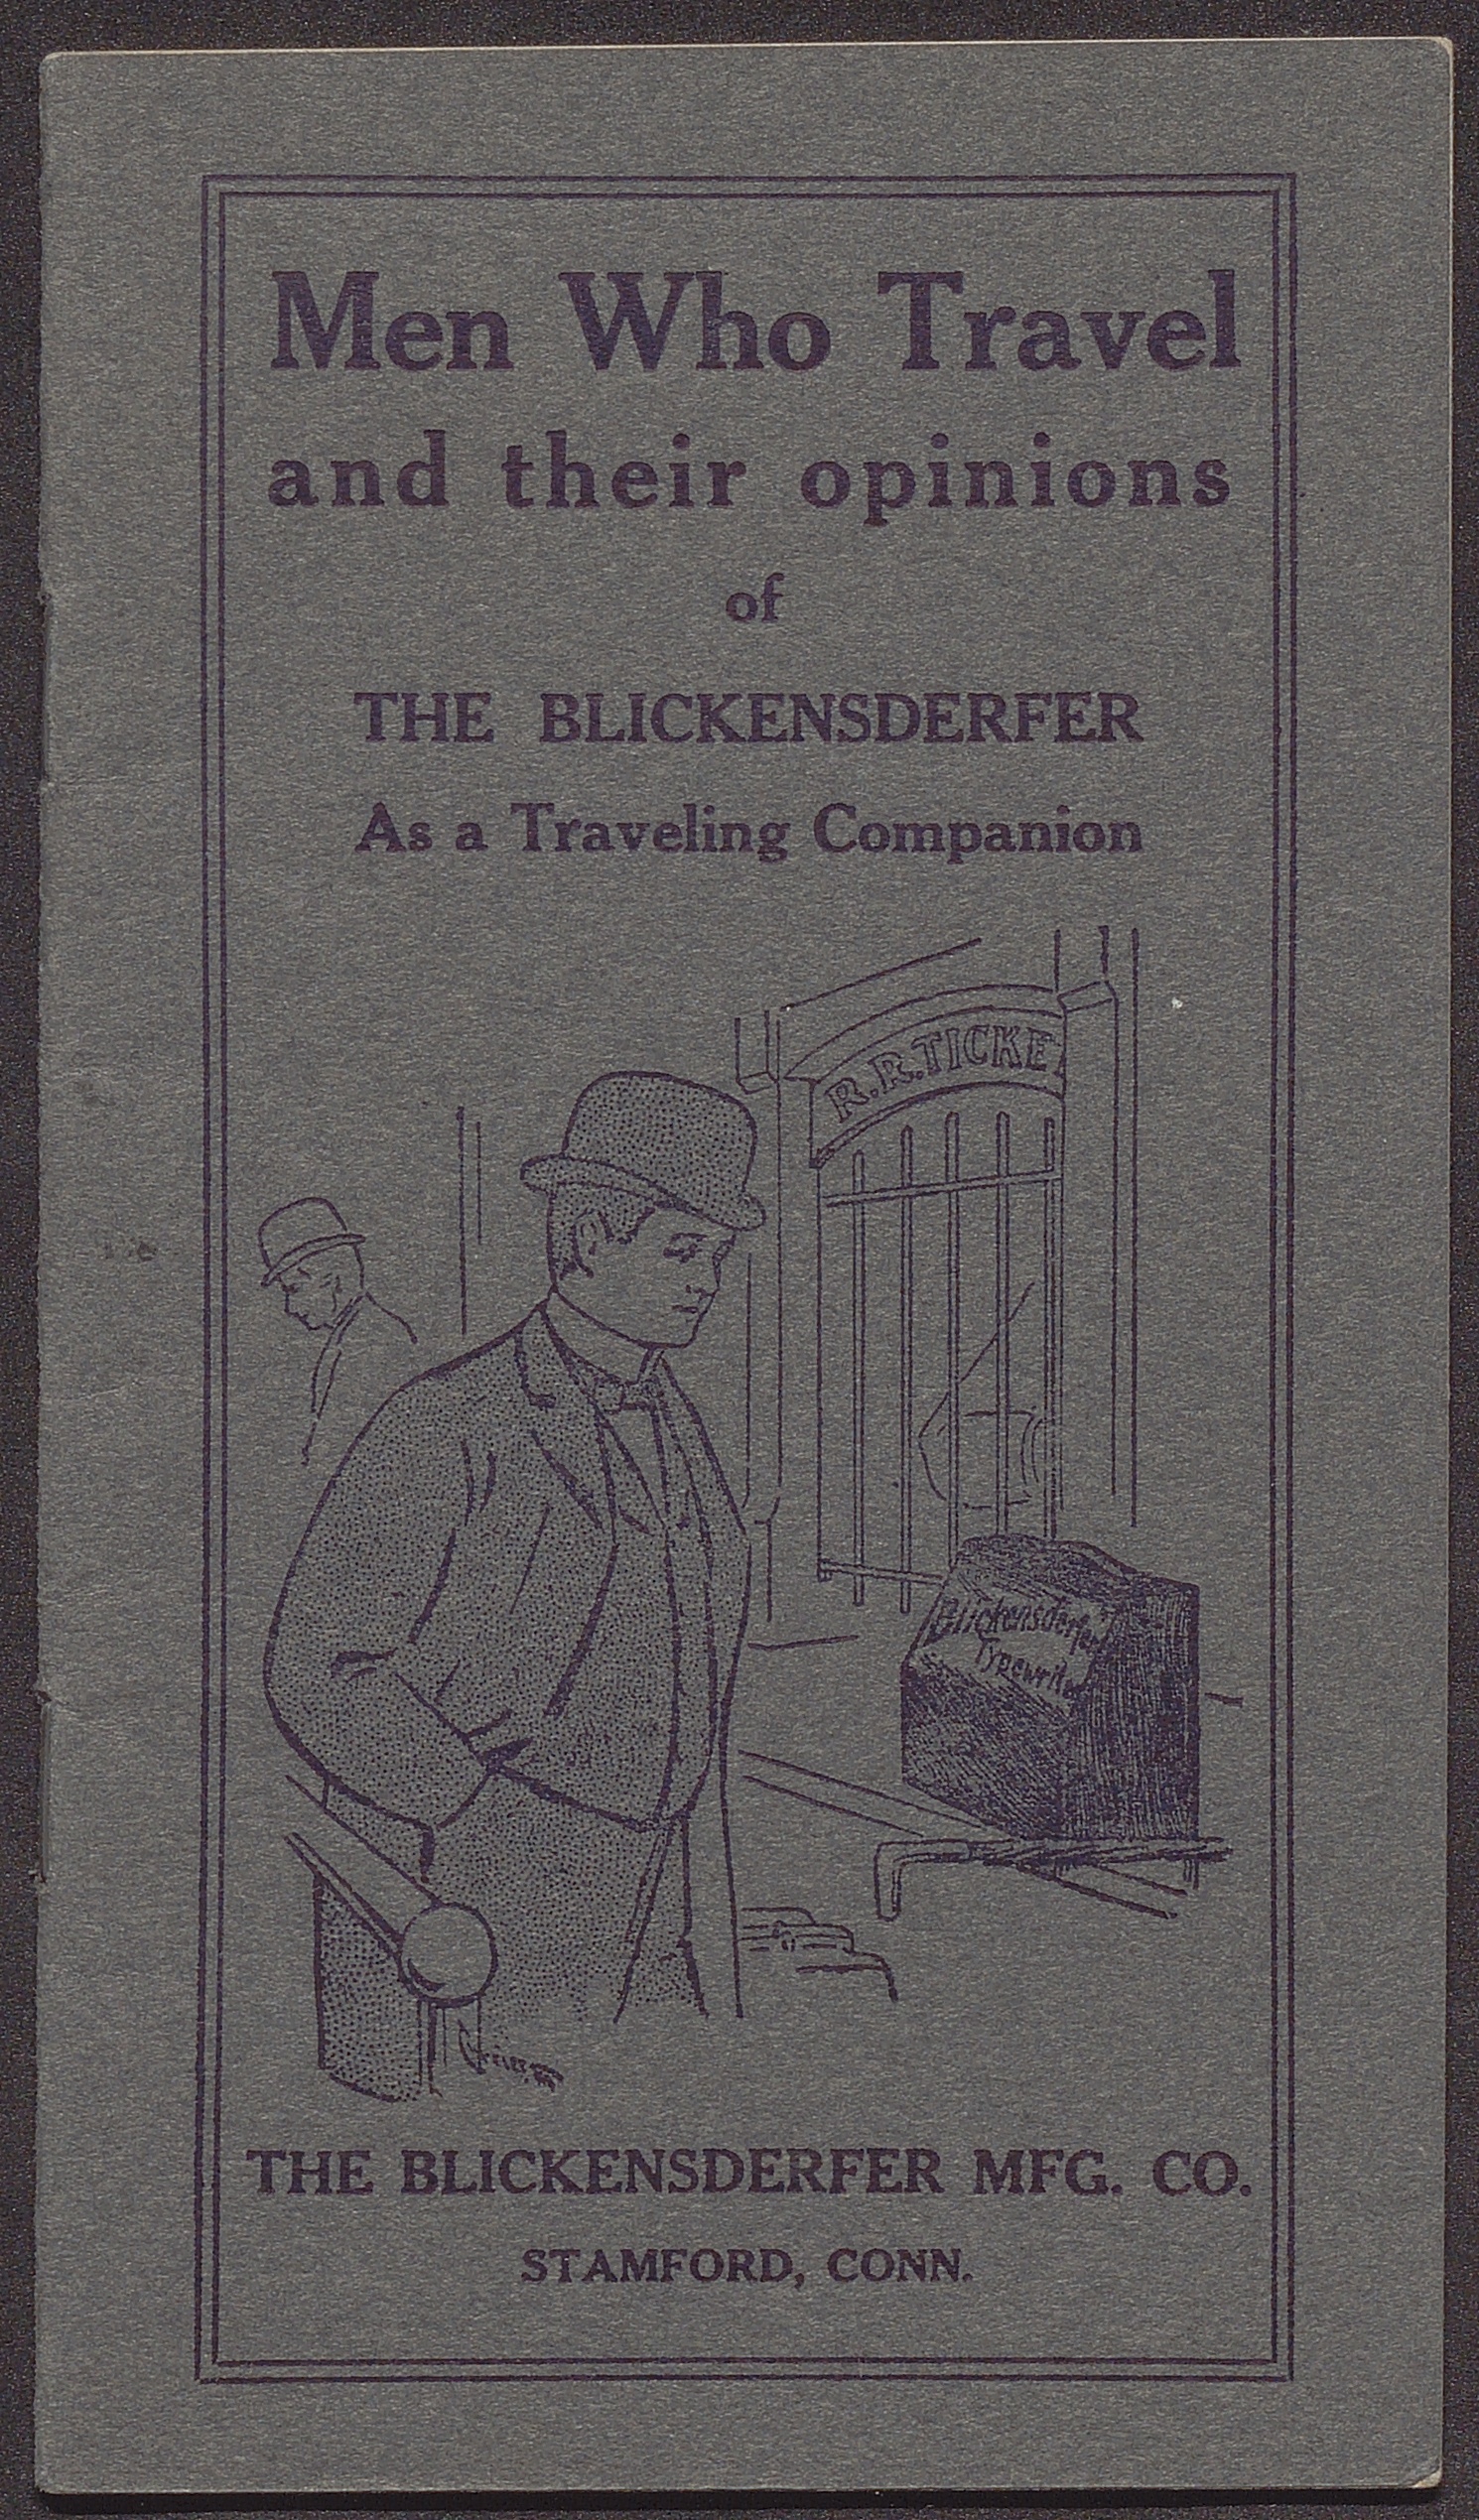 Catalog with illustration of a man standing at a ticket booth with a portable typewriter.